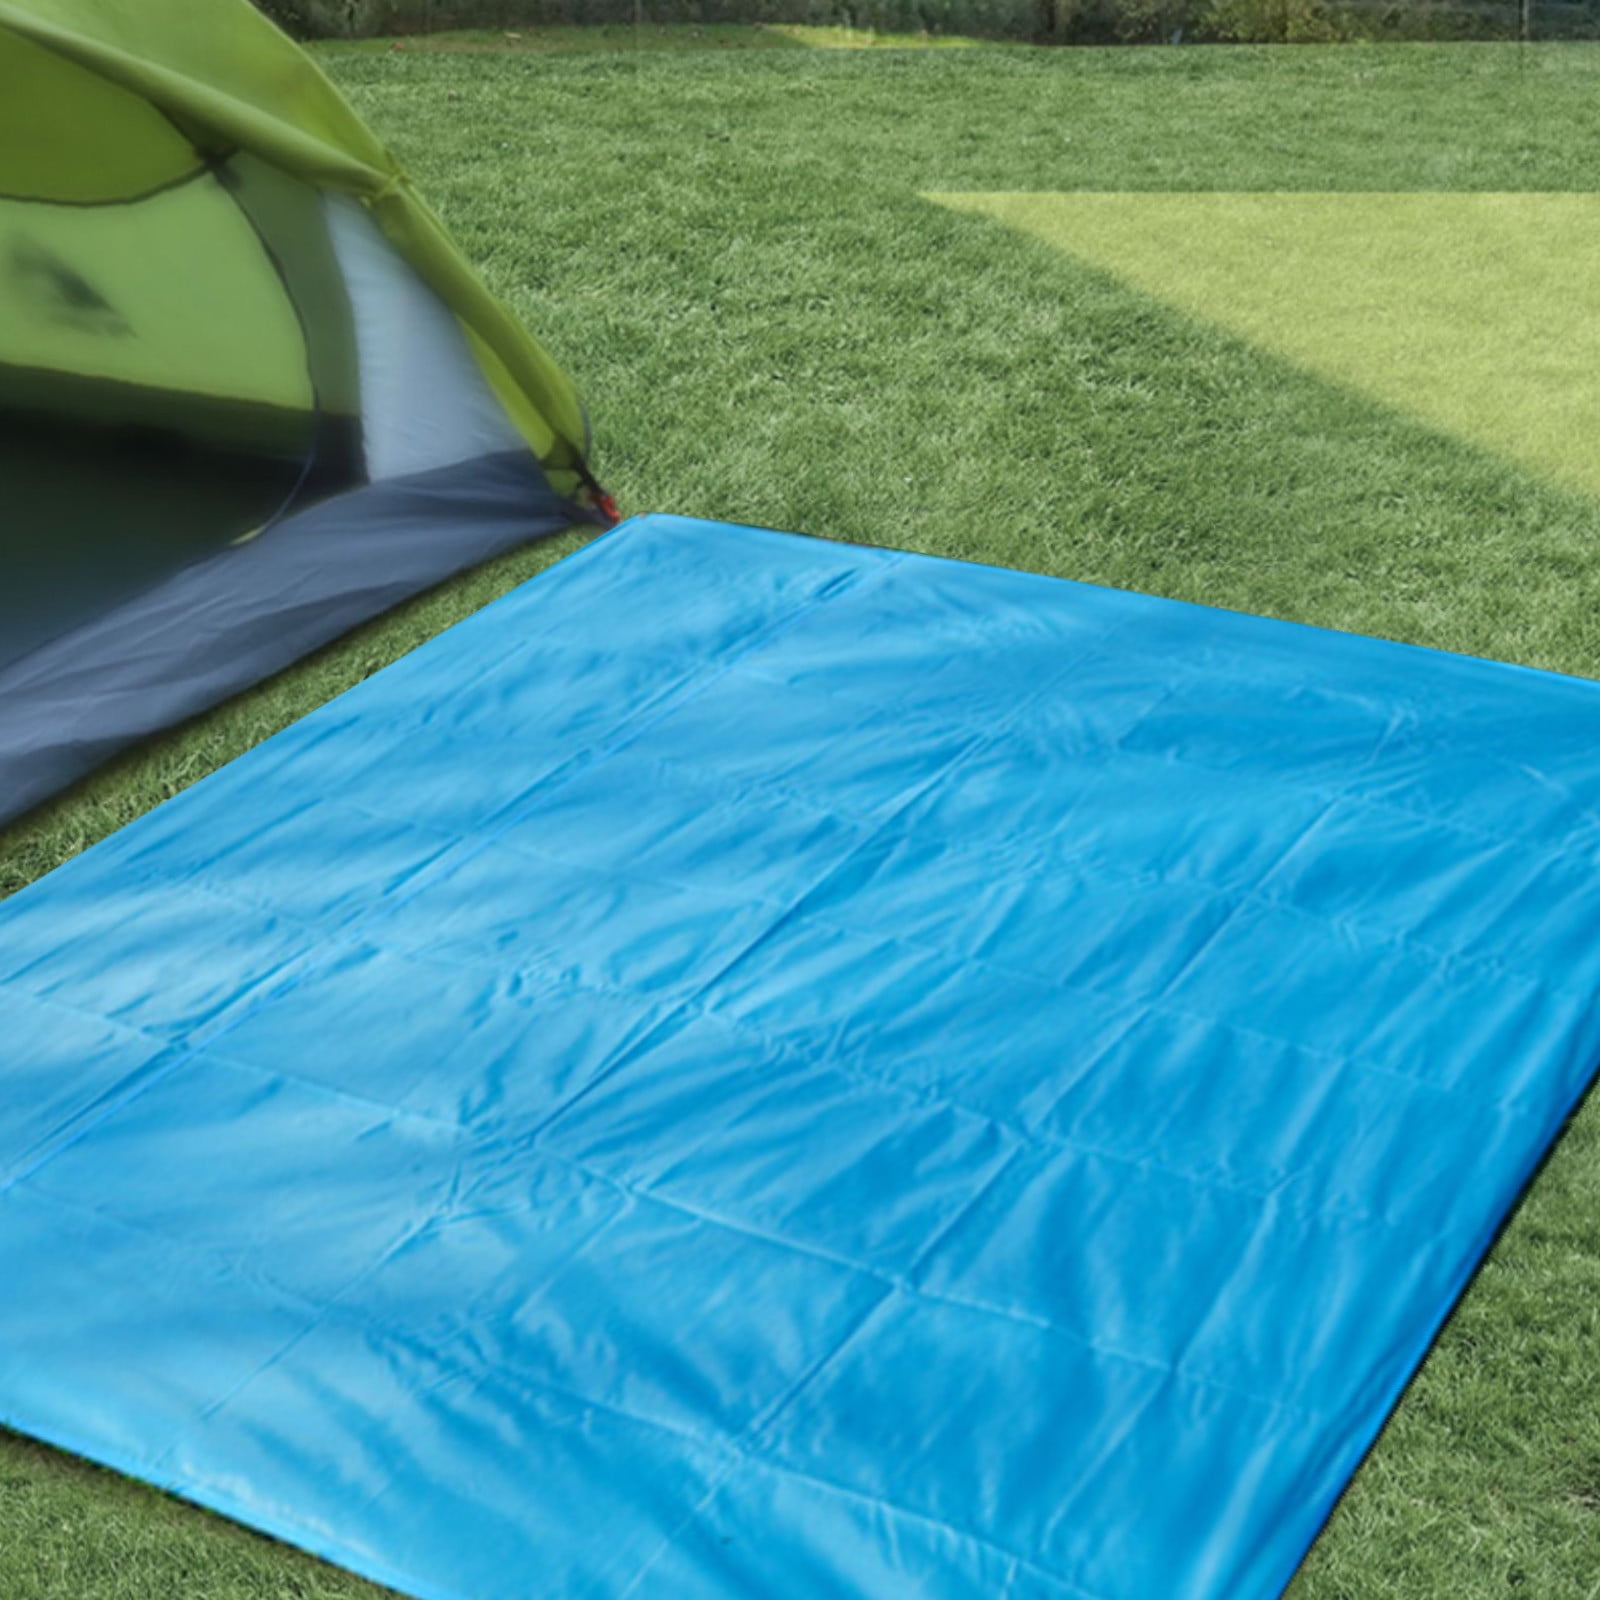 Hanwell Goods Waterproof Outdoor Plastic Straw Rug, Outdoor Patio Mats  Clearance, Plastic Camping Rug for RV, Backyard, Deck, Picnic, Beach,  Trailer